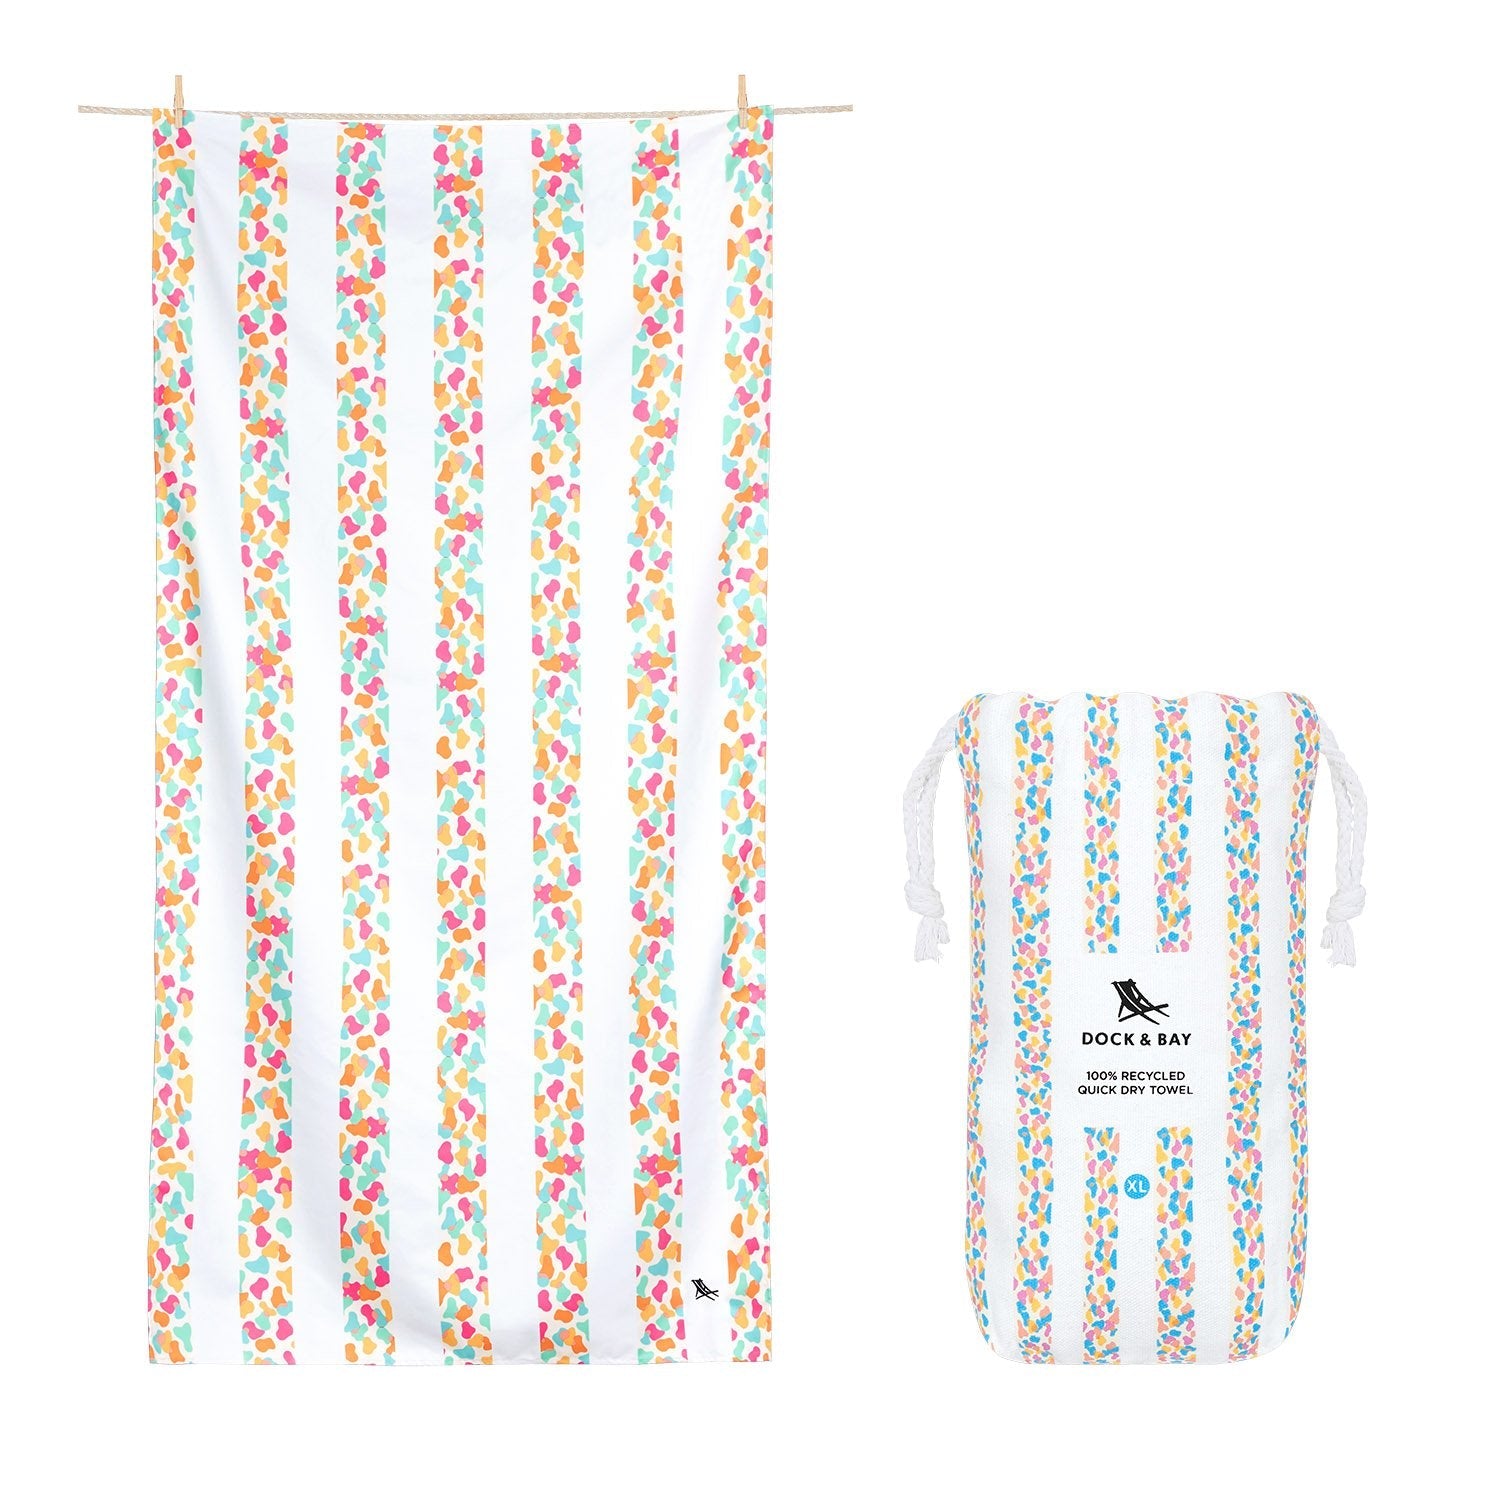 Celebrations Collection XLarge Towel - Jiggly Jelly Gifts Dock & Bay   